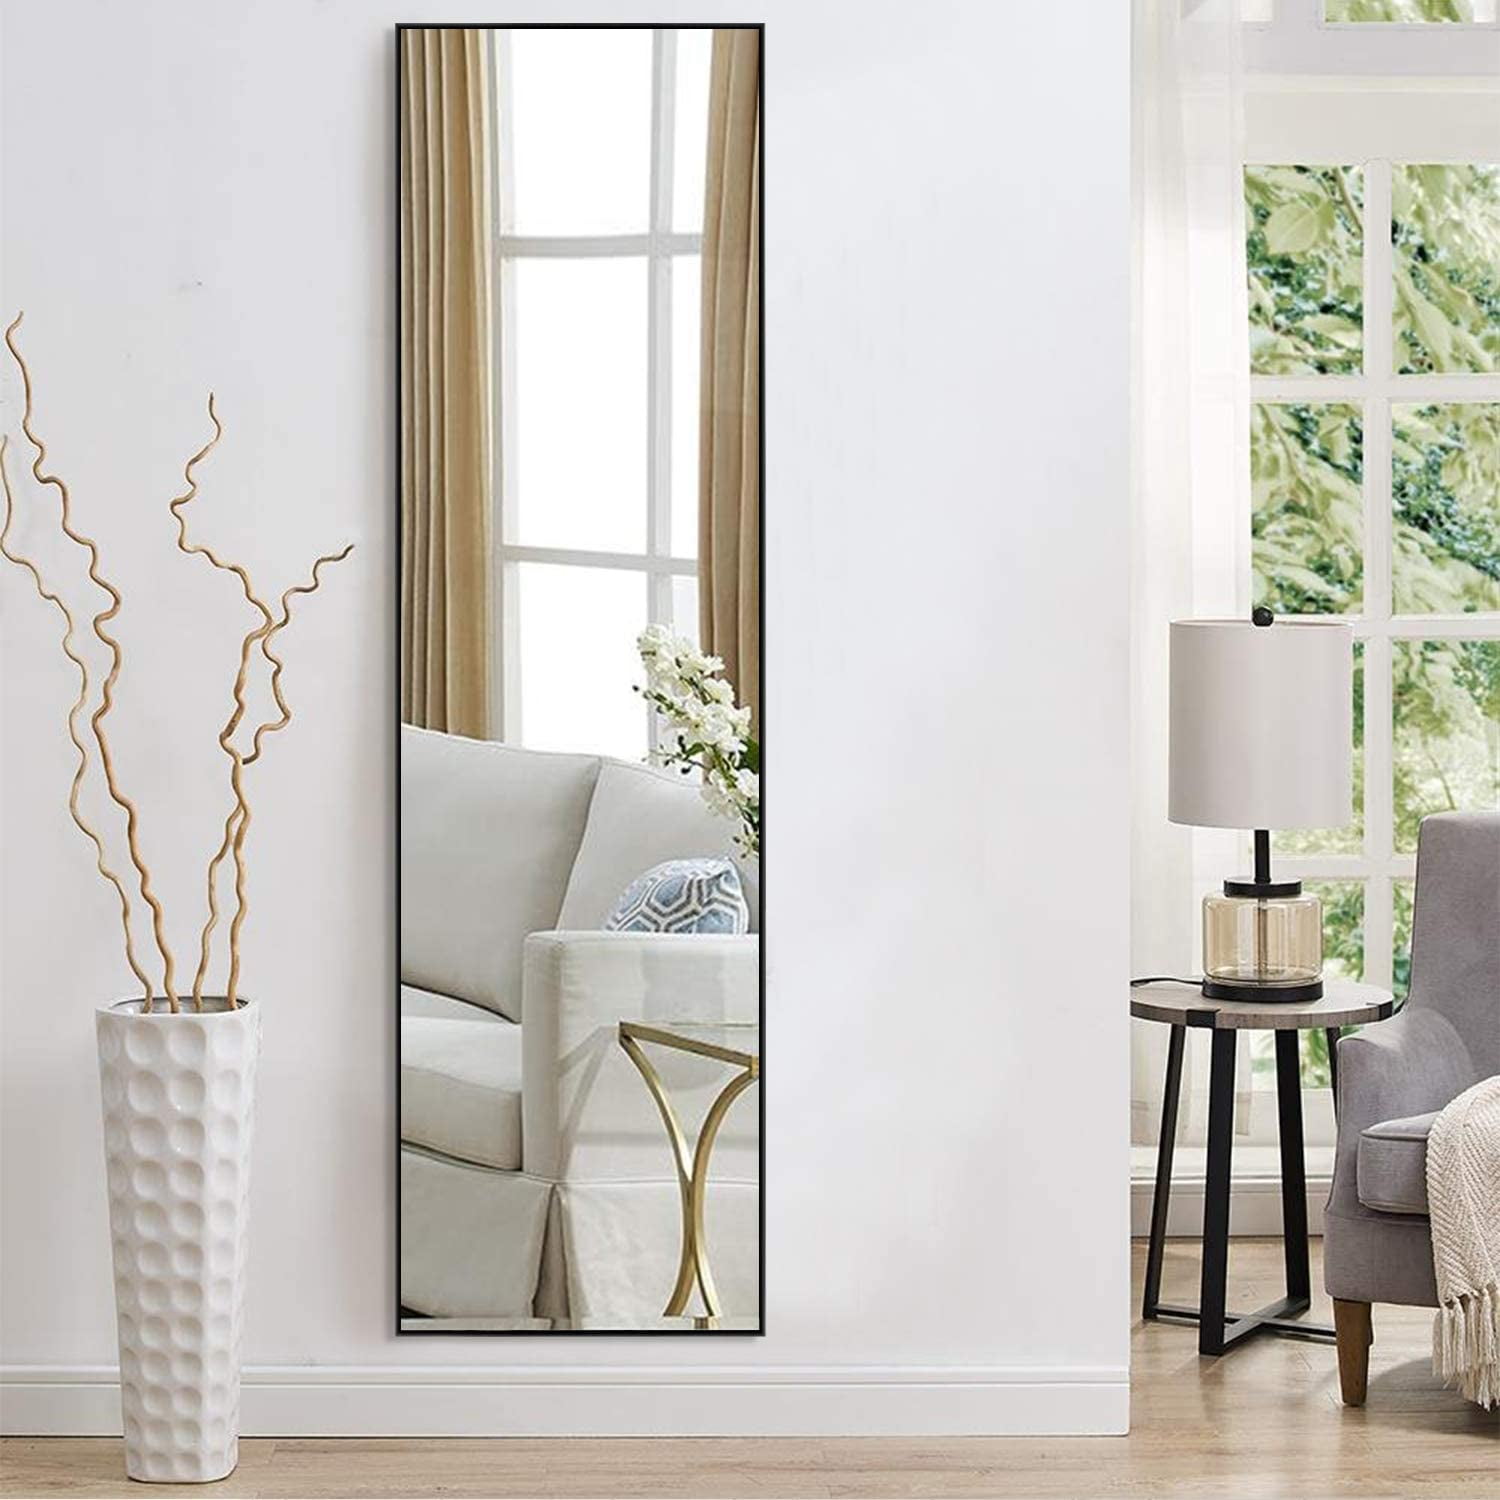 Floor Mirrors Full Length: Reflect Your Style With Elegance